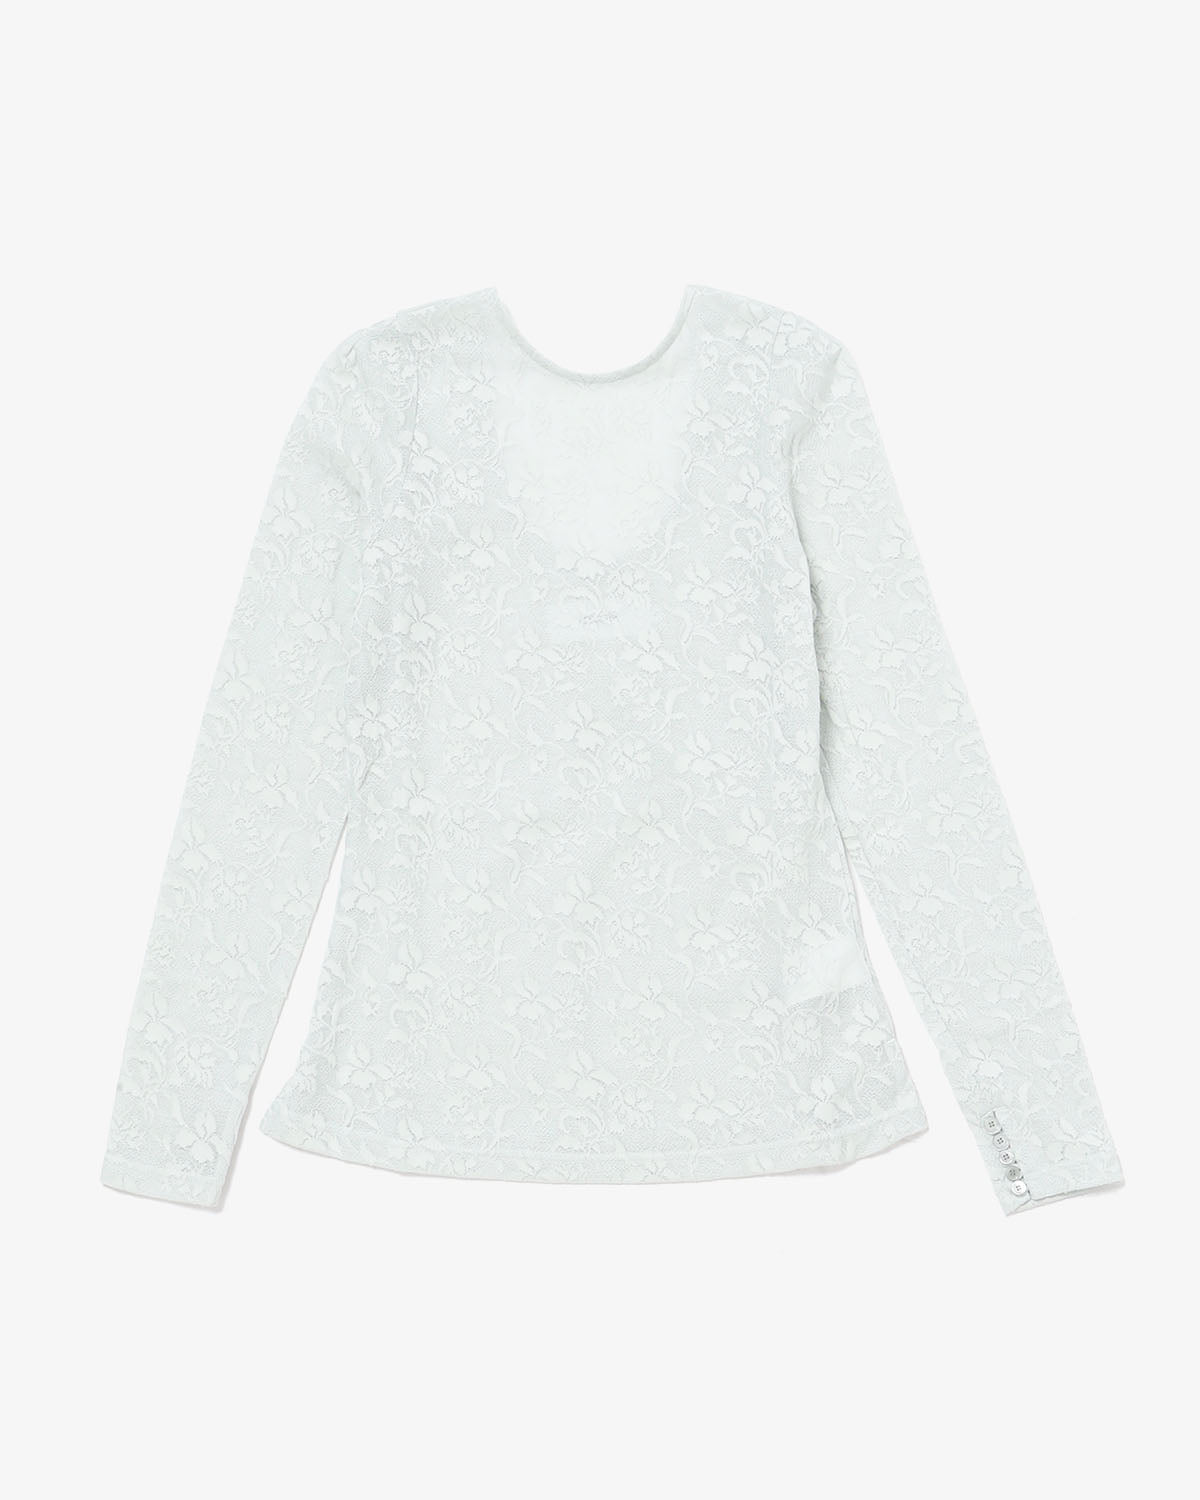 LACE JACQUARD PULLOVER